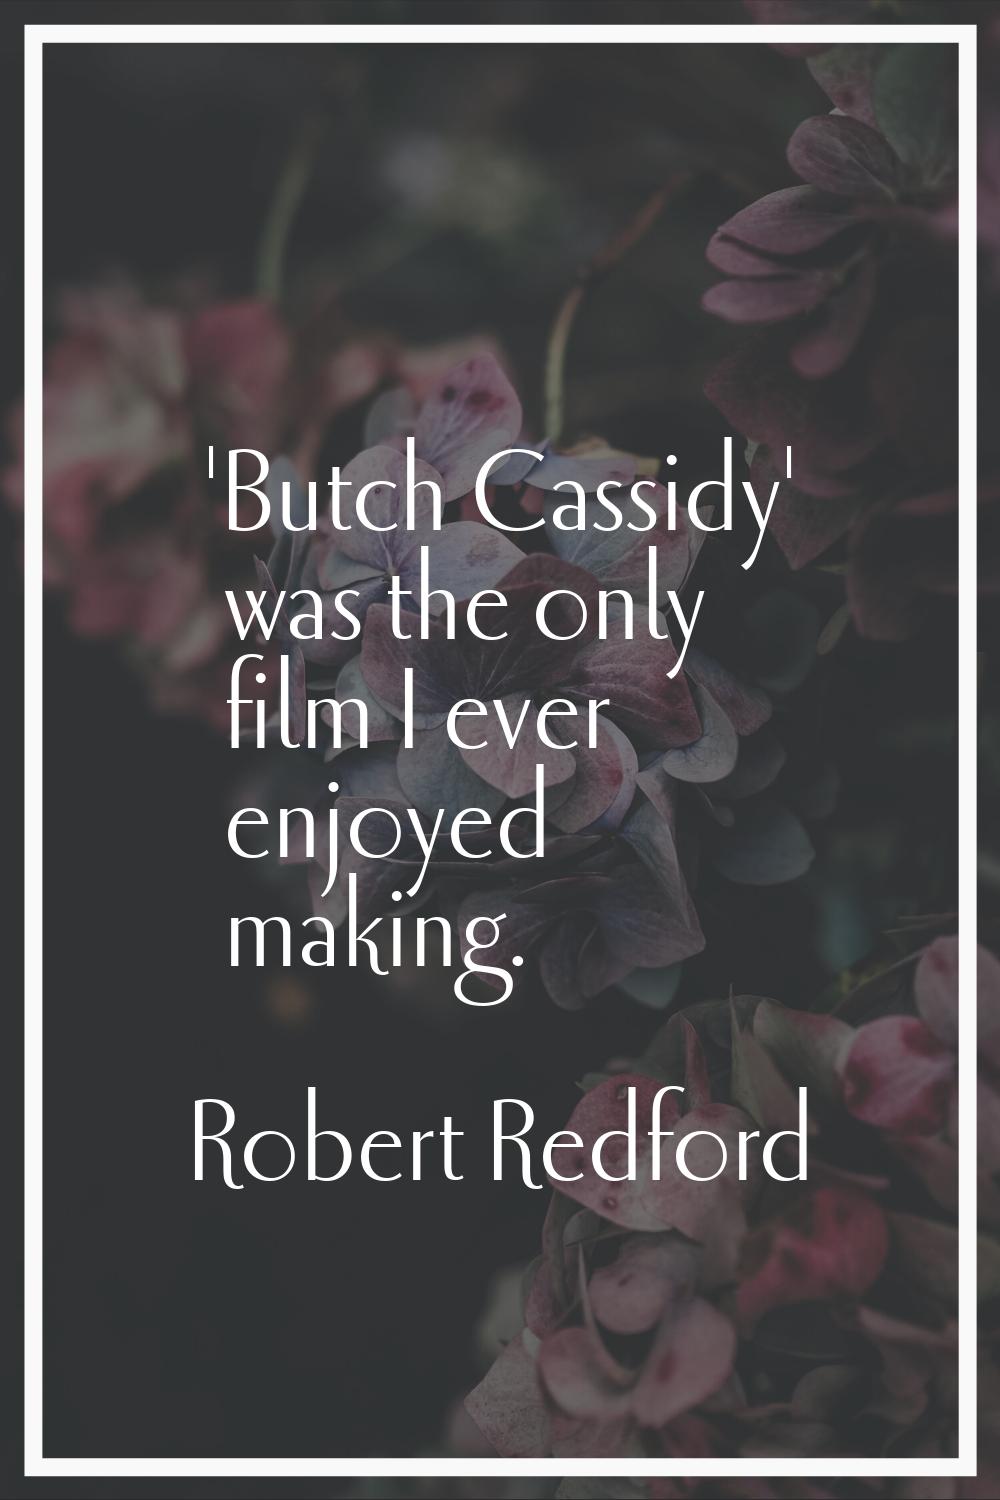 'Butch Cassidy' was the only film I ever enjoyed making.